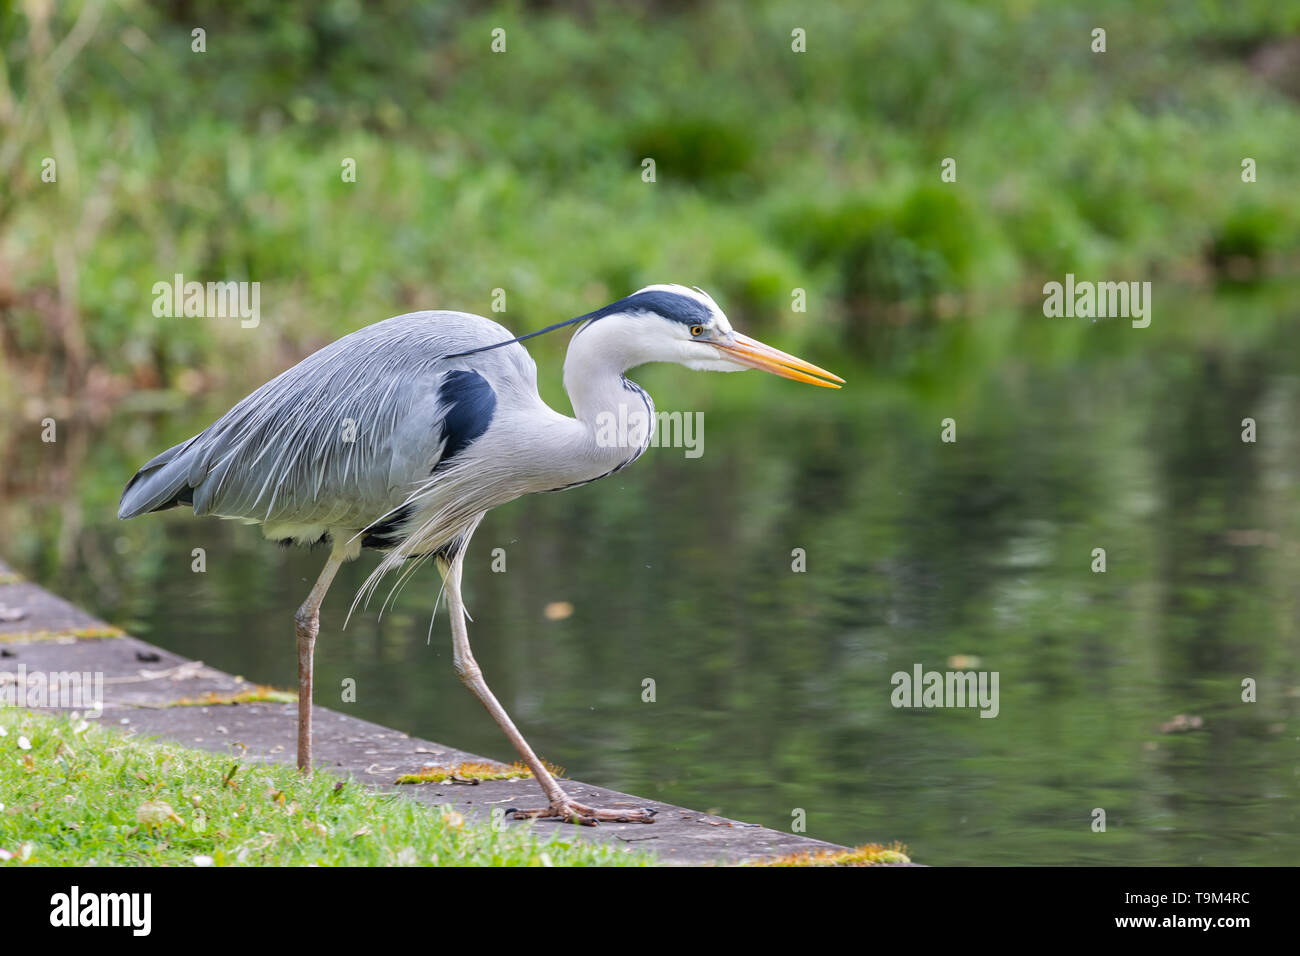 Close view of Great blue heron walking nearby a pool, hunting for fish. Stock Photo